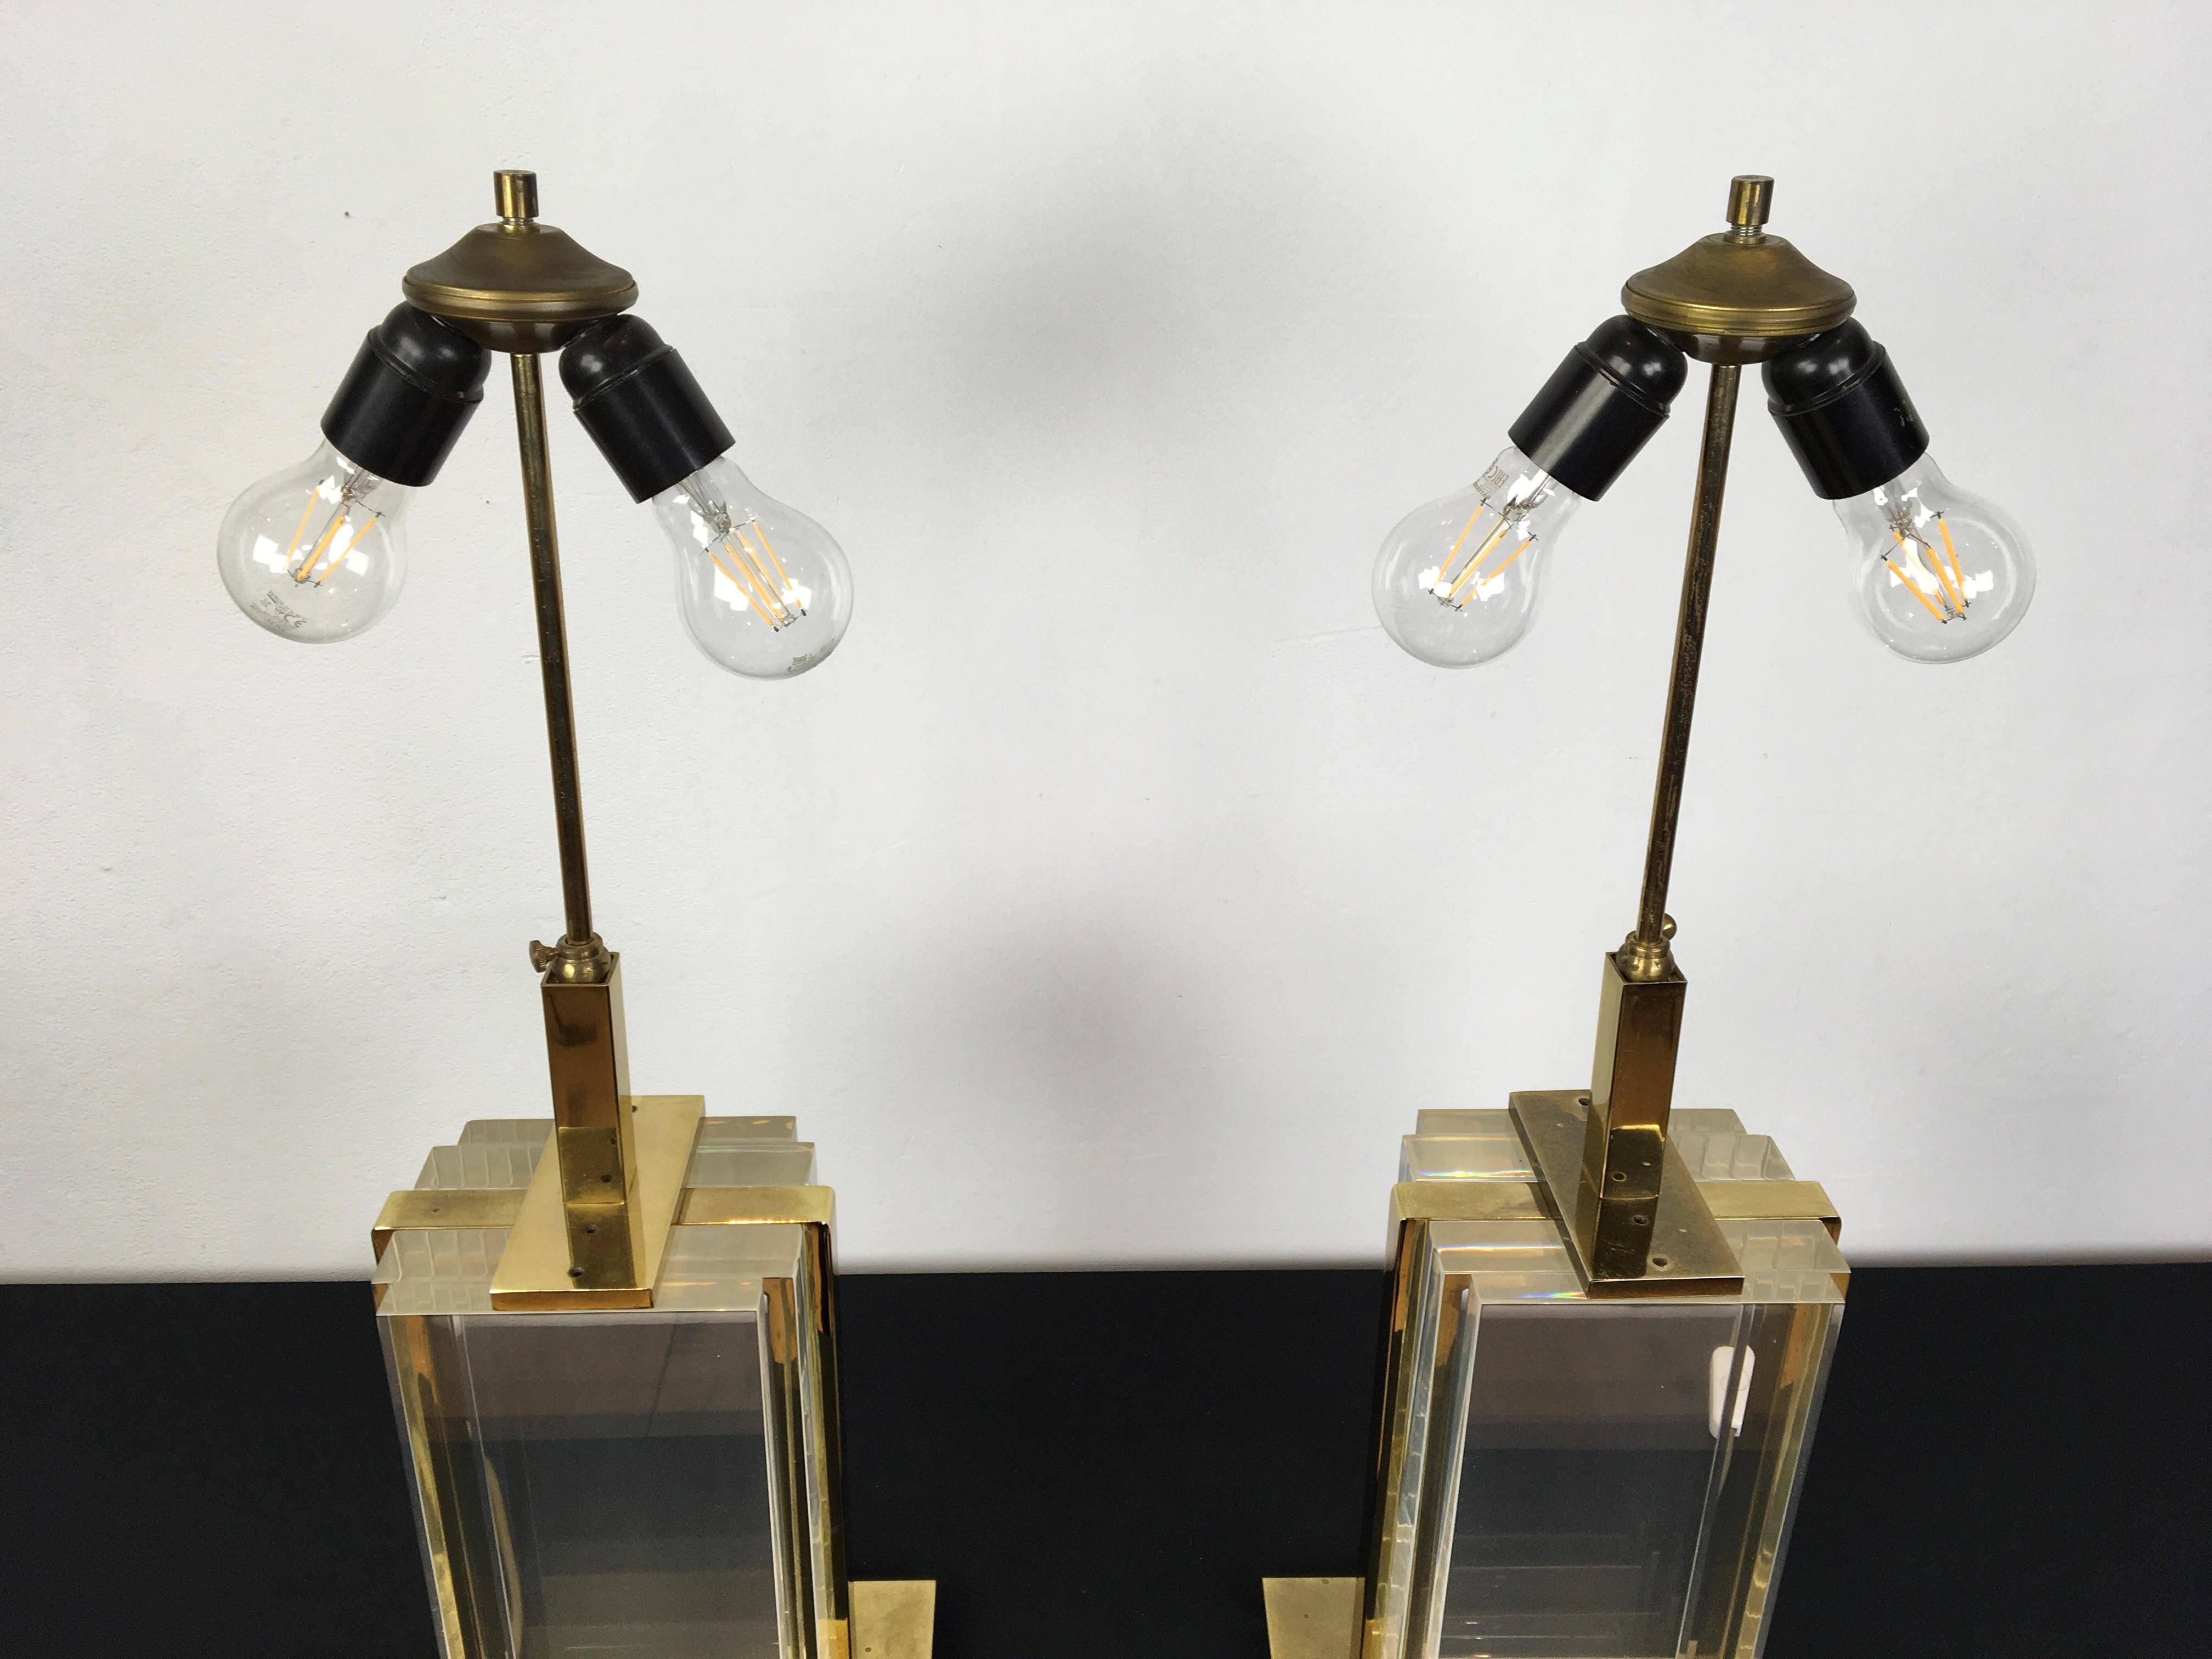 Pair of Belgo Chrome Table Lamps, Lucite and Brass, 1970s For Sale 3